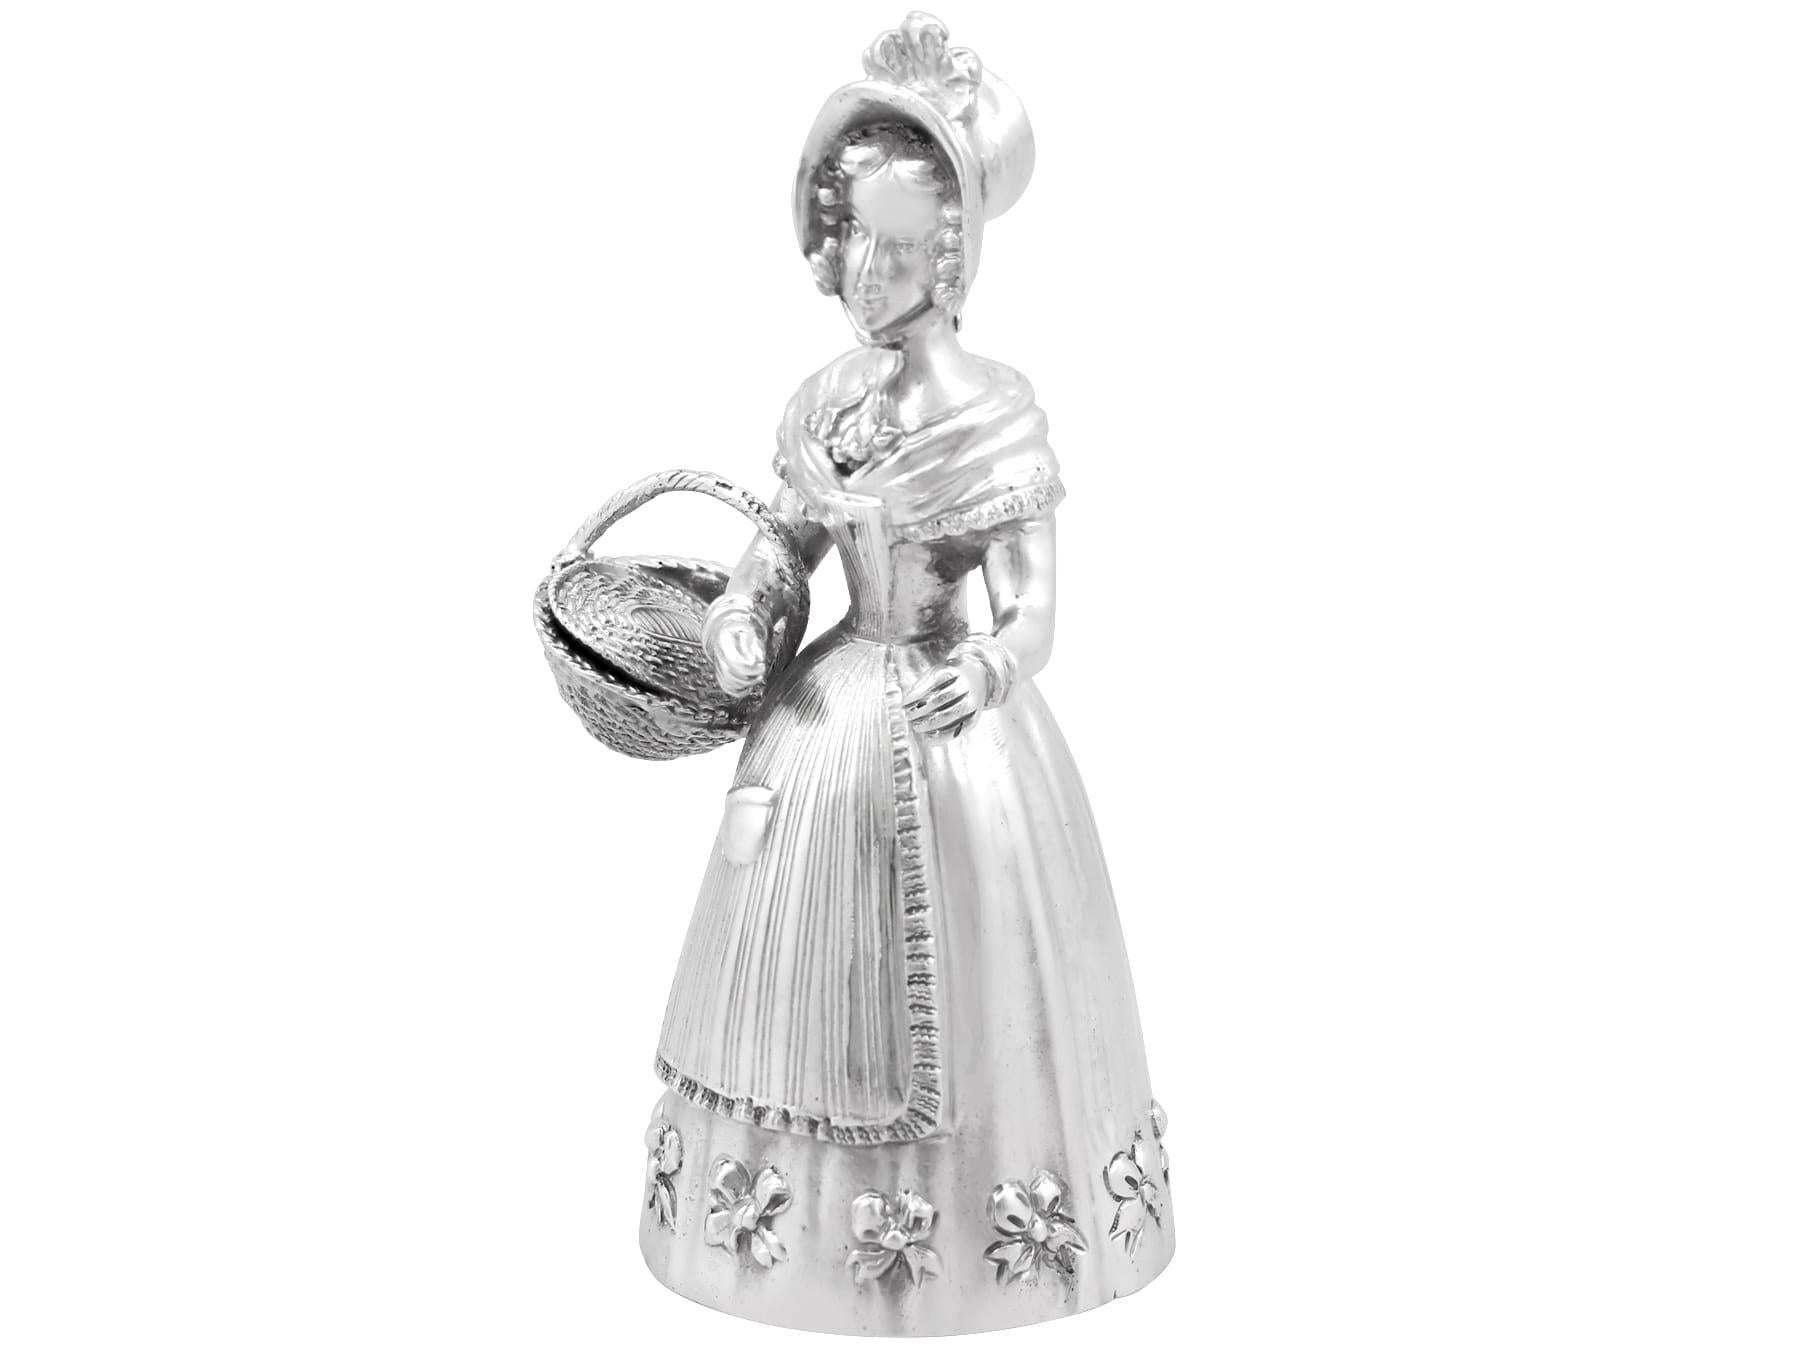 An exceptional, fine and impressive antique Edwardian English sterling silver figural table bell; an addition to our range of ornamental silverware.

This exceptional antique Edwardian cast sterling silver table bell has been modelled in the form